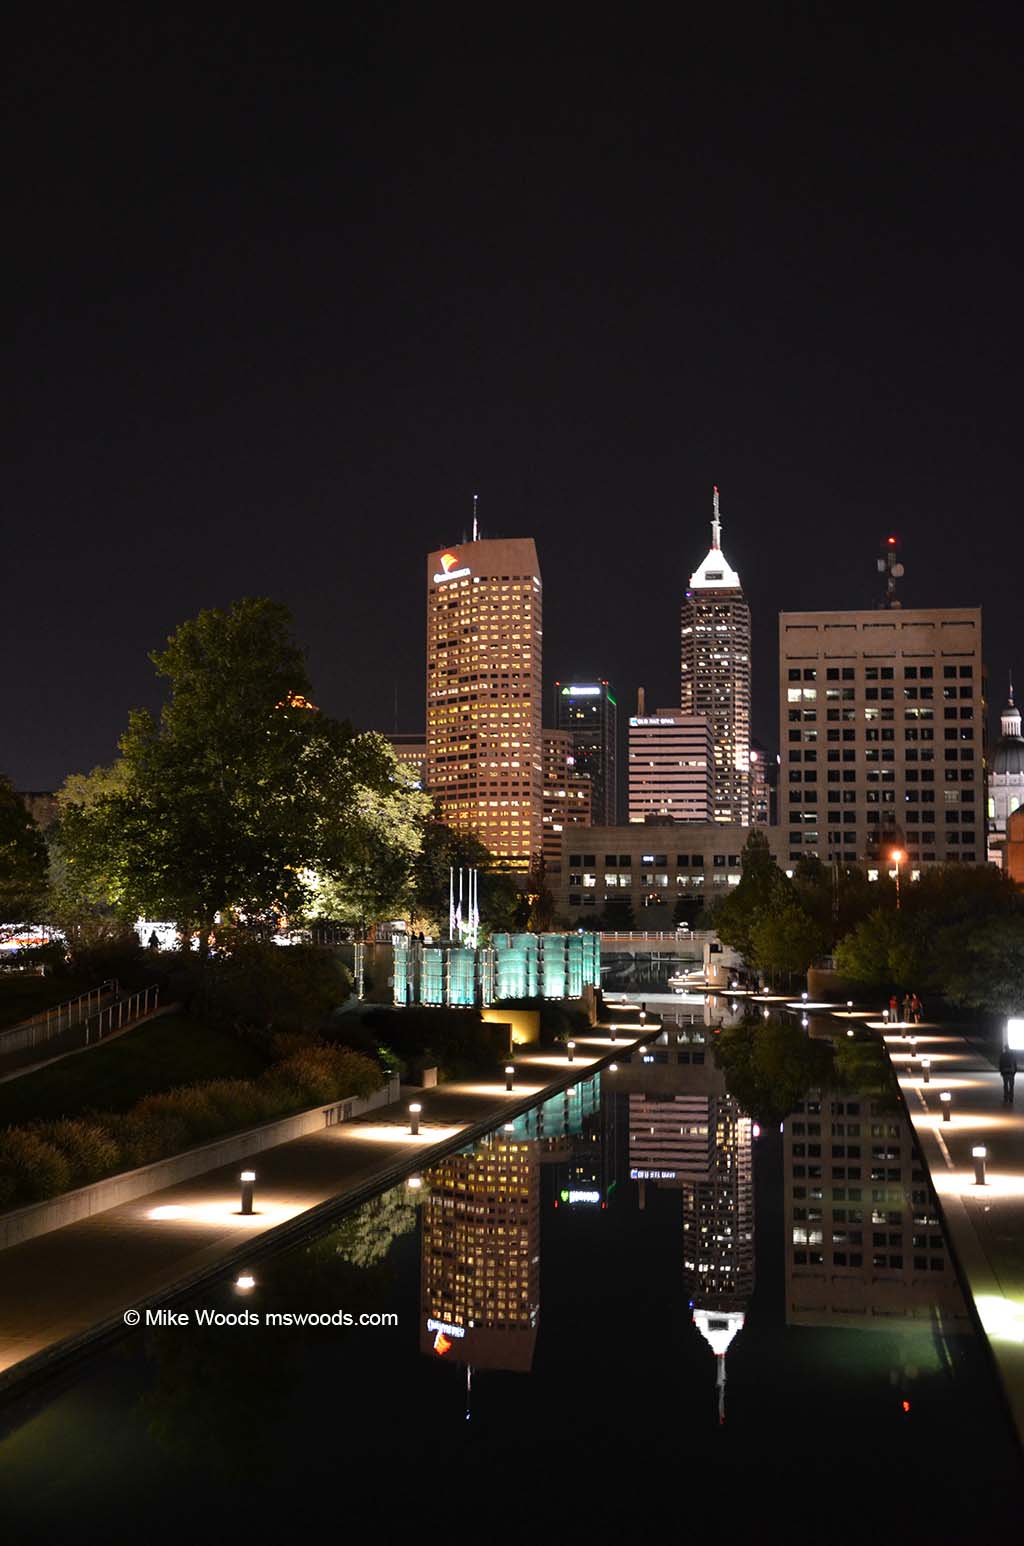 City lights at night from the Canal Walk in White River State Park in downtown Indianapolis, Indiana